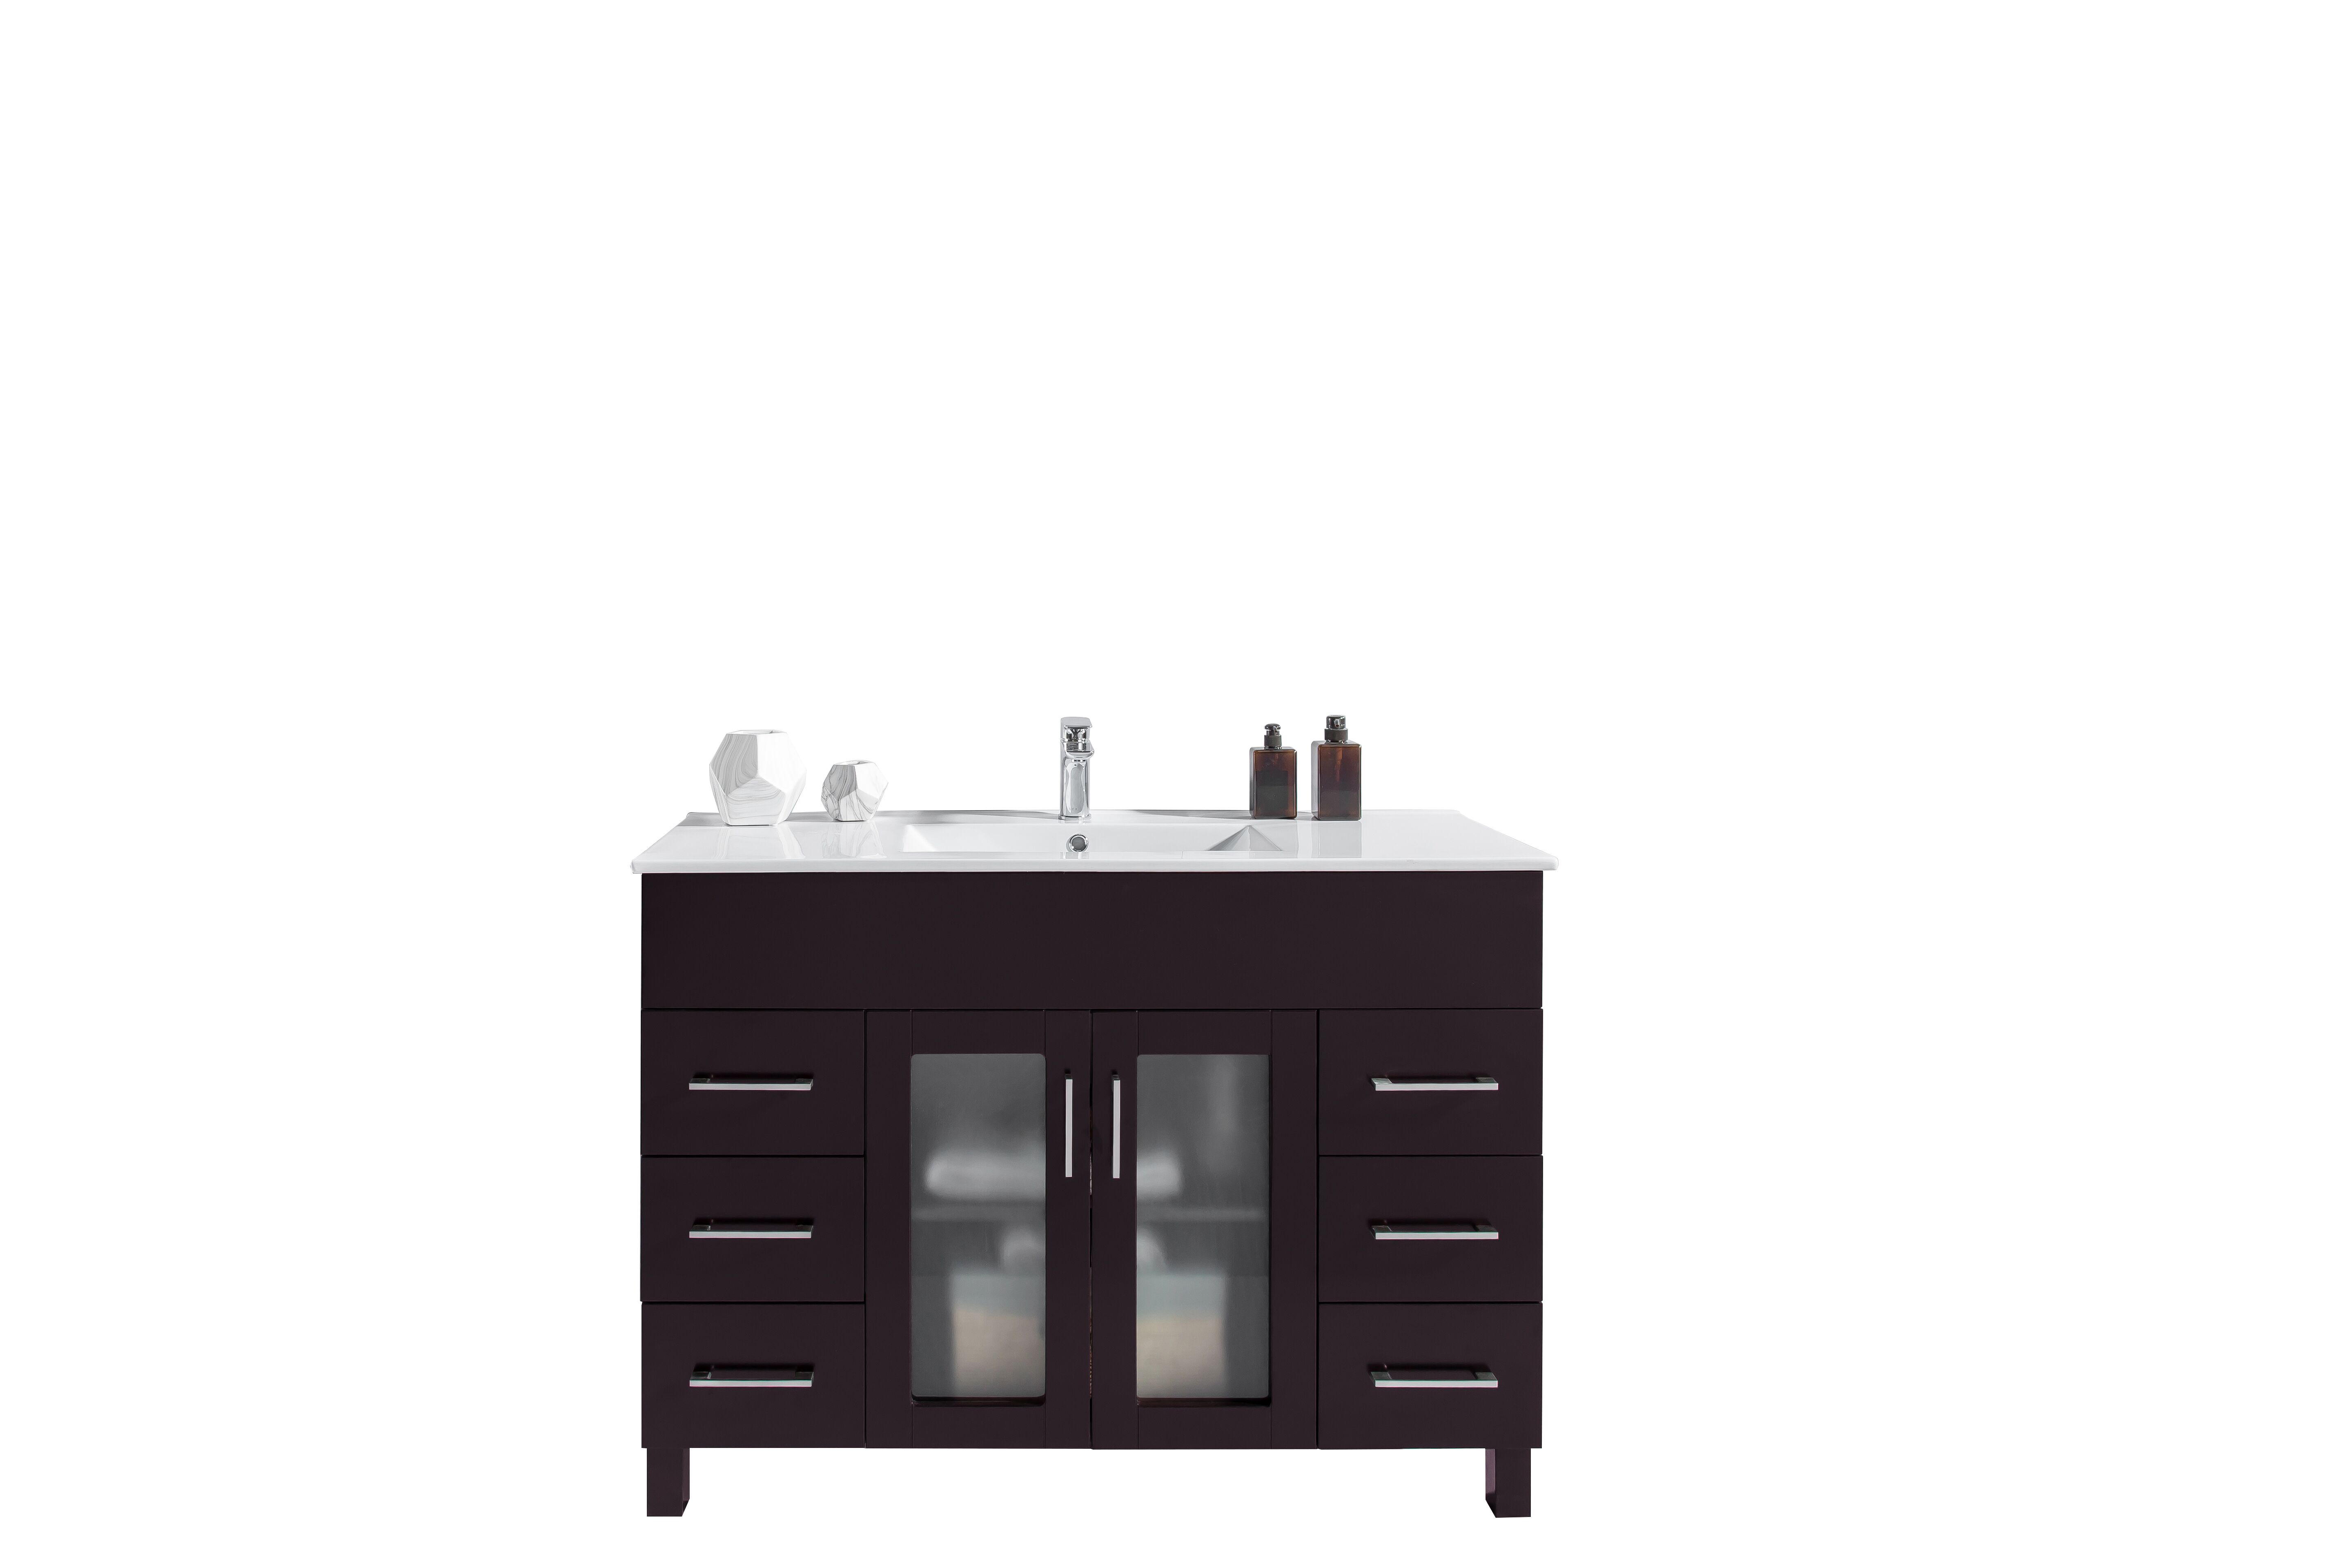 48" Single Bathroom Vanity Cabinet + Ceramic Basin Counter with Color and Mirror Options